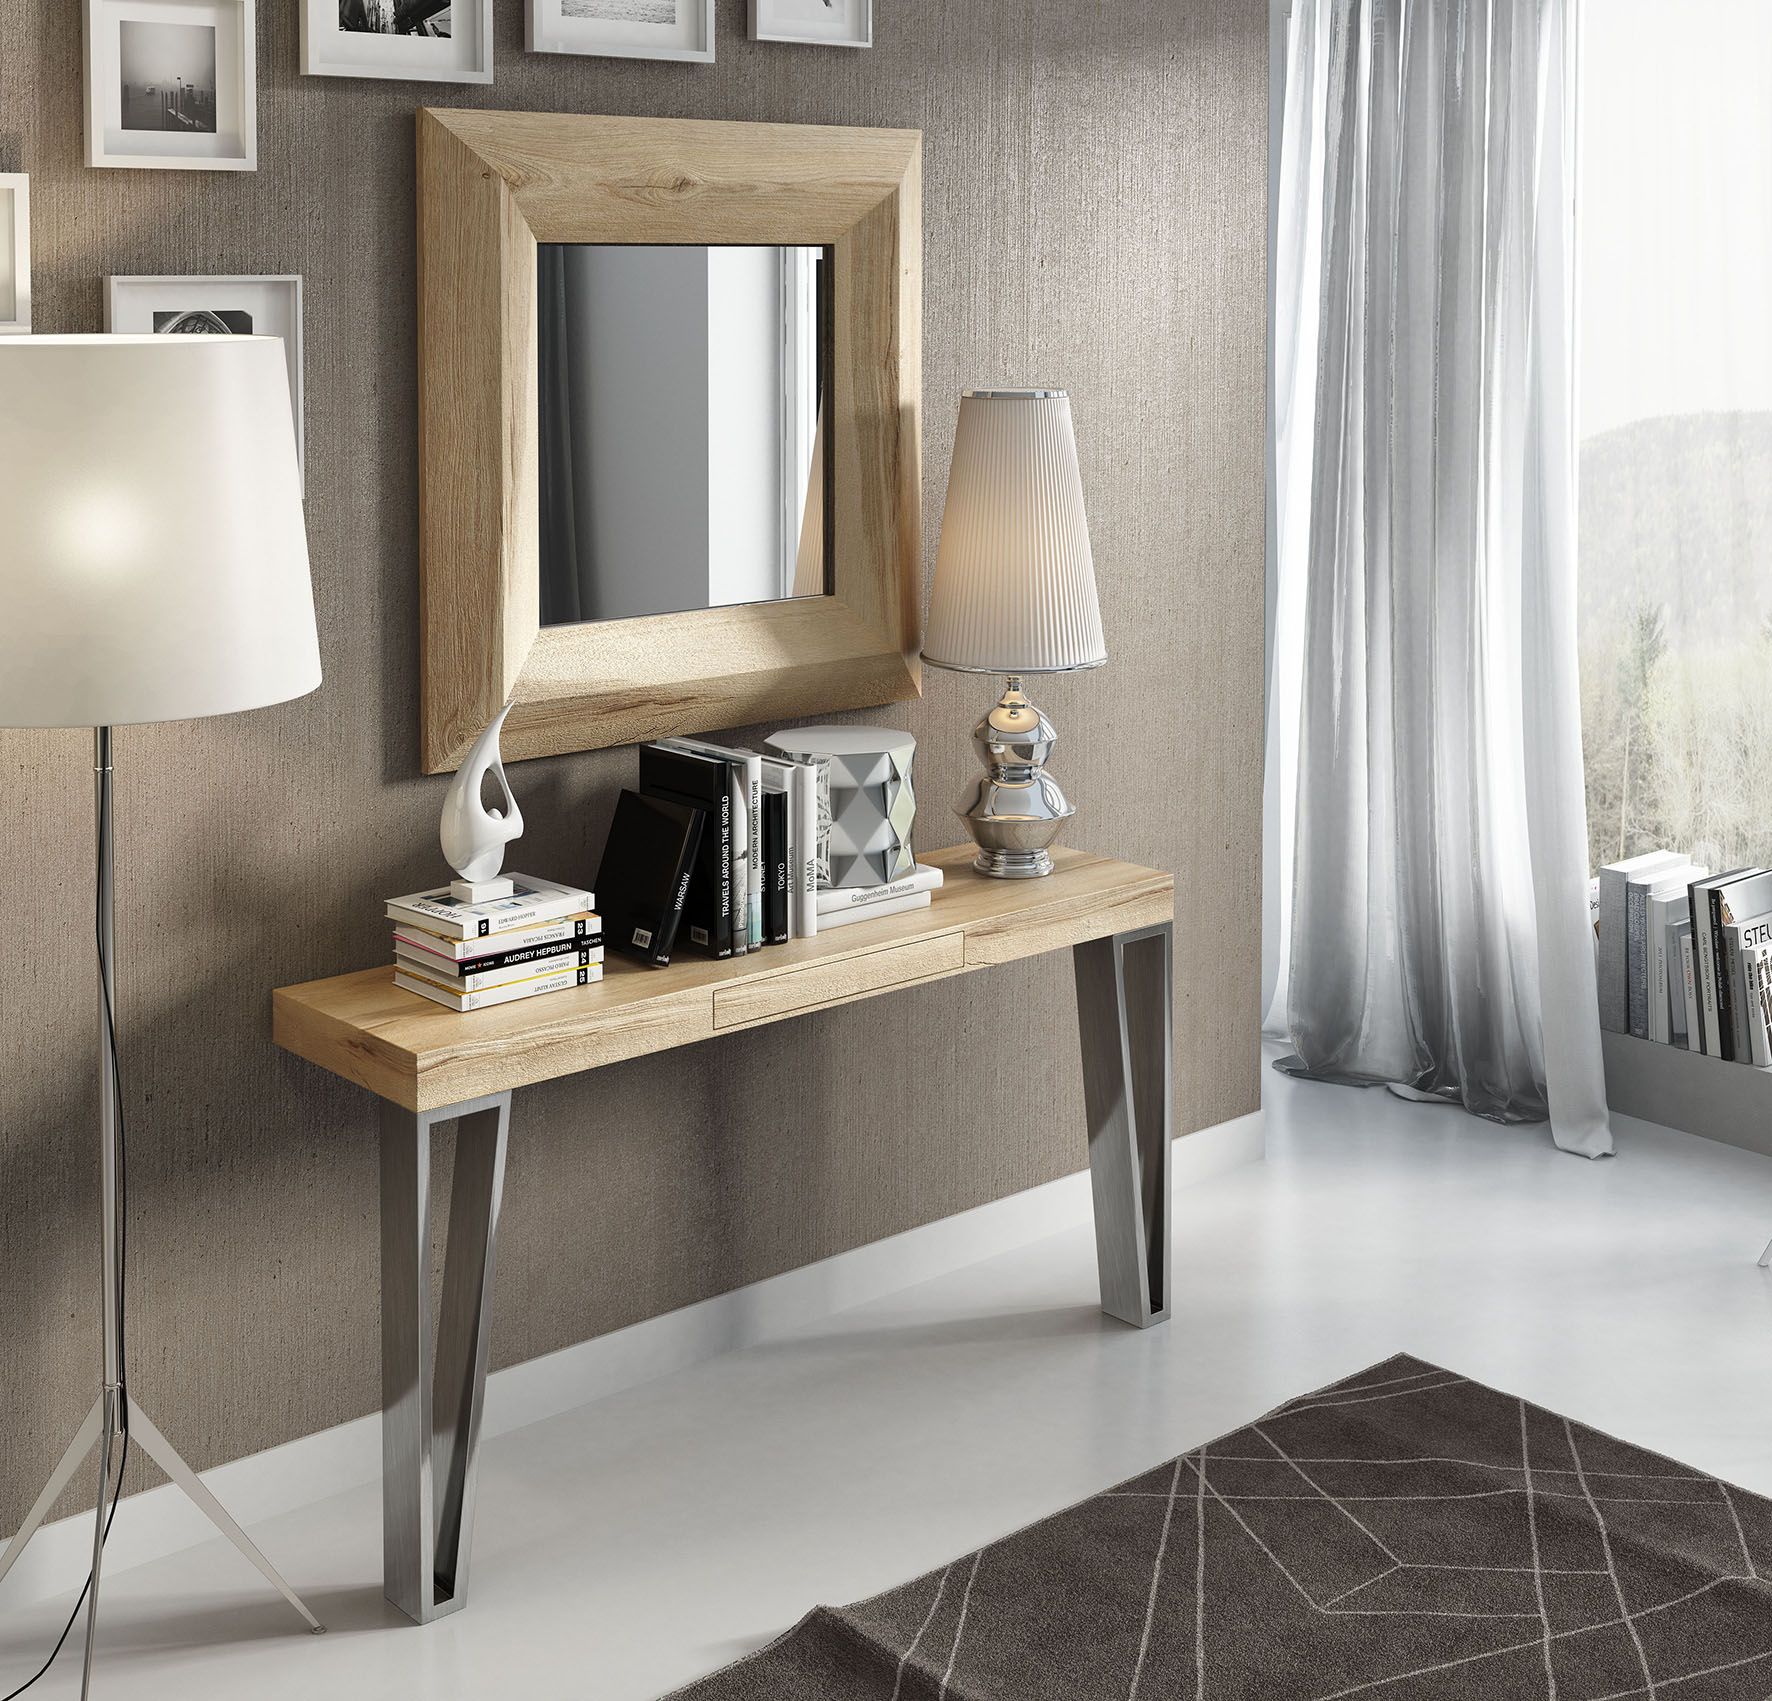 Brands Franco ENZO Dining and Wall Units, Spain CII.43 Console Table